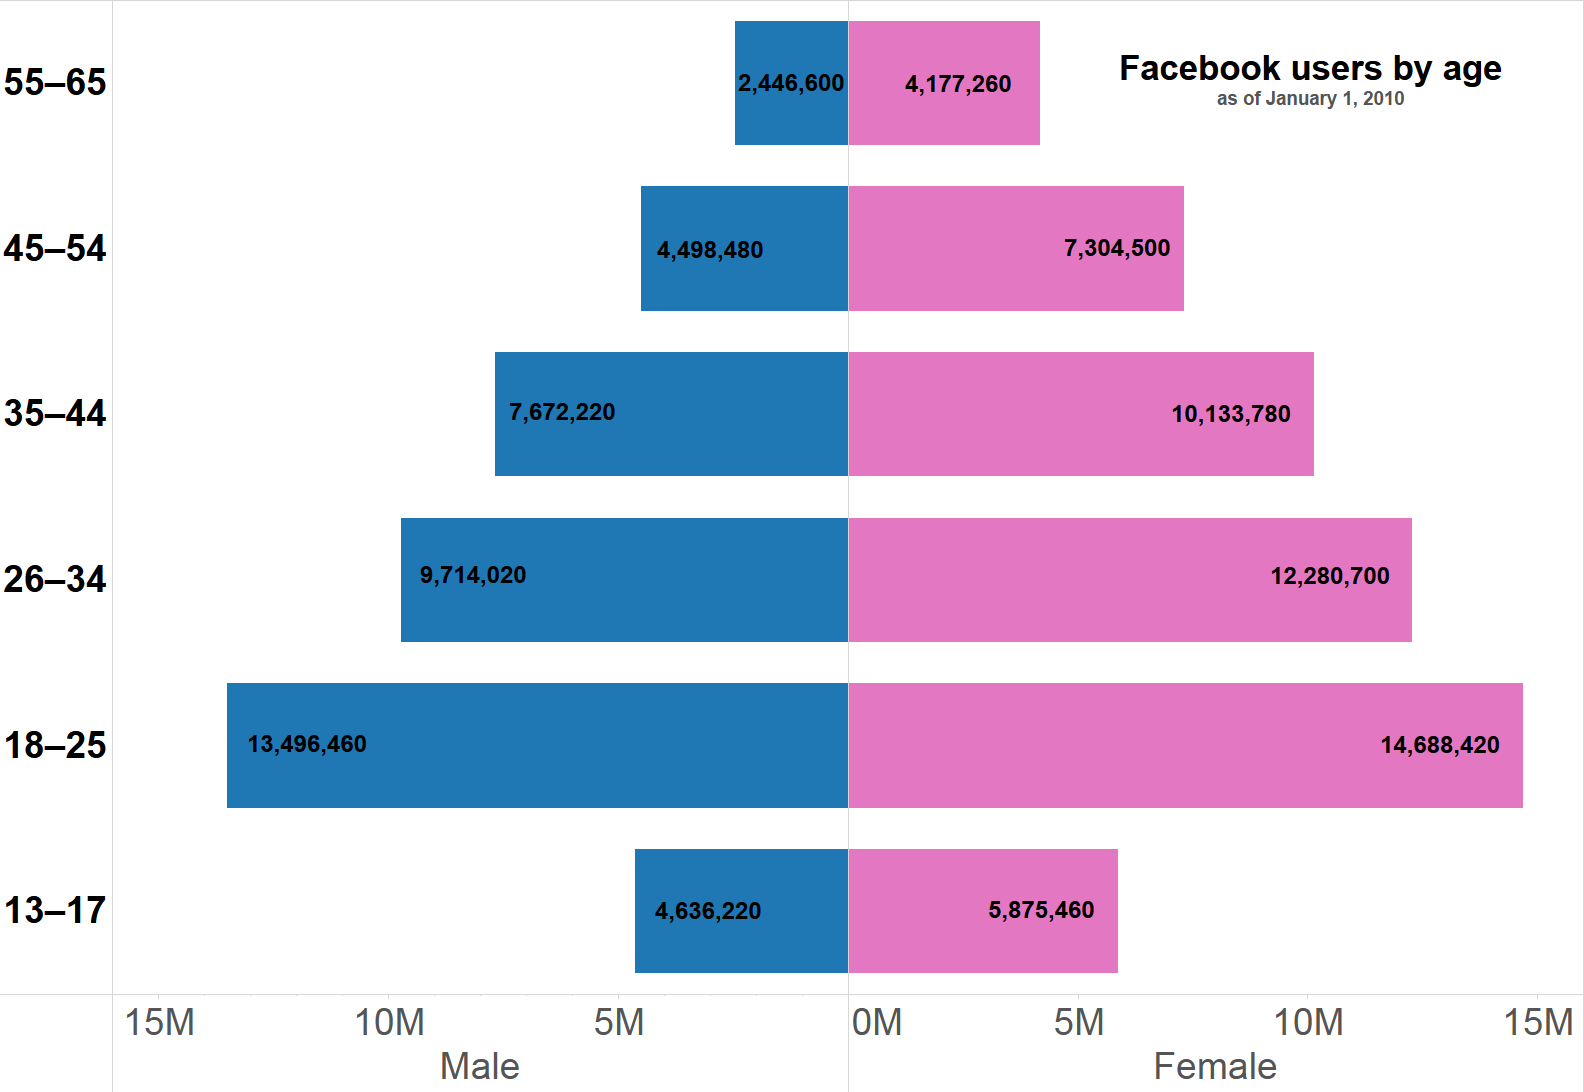 Population_pyramid_of_Facebook_users_by_age